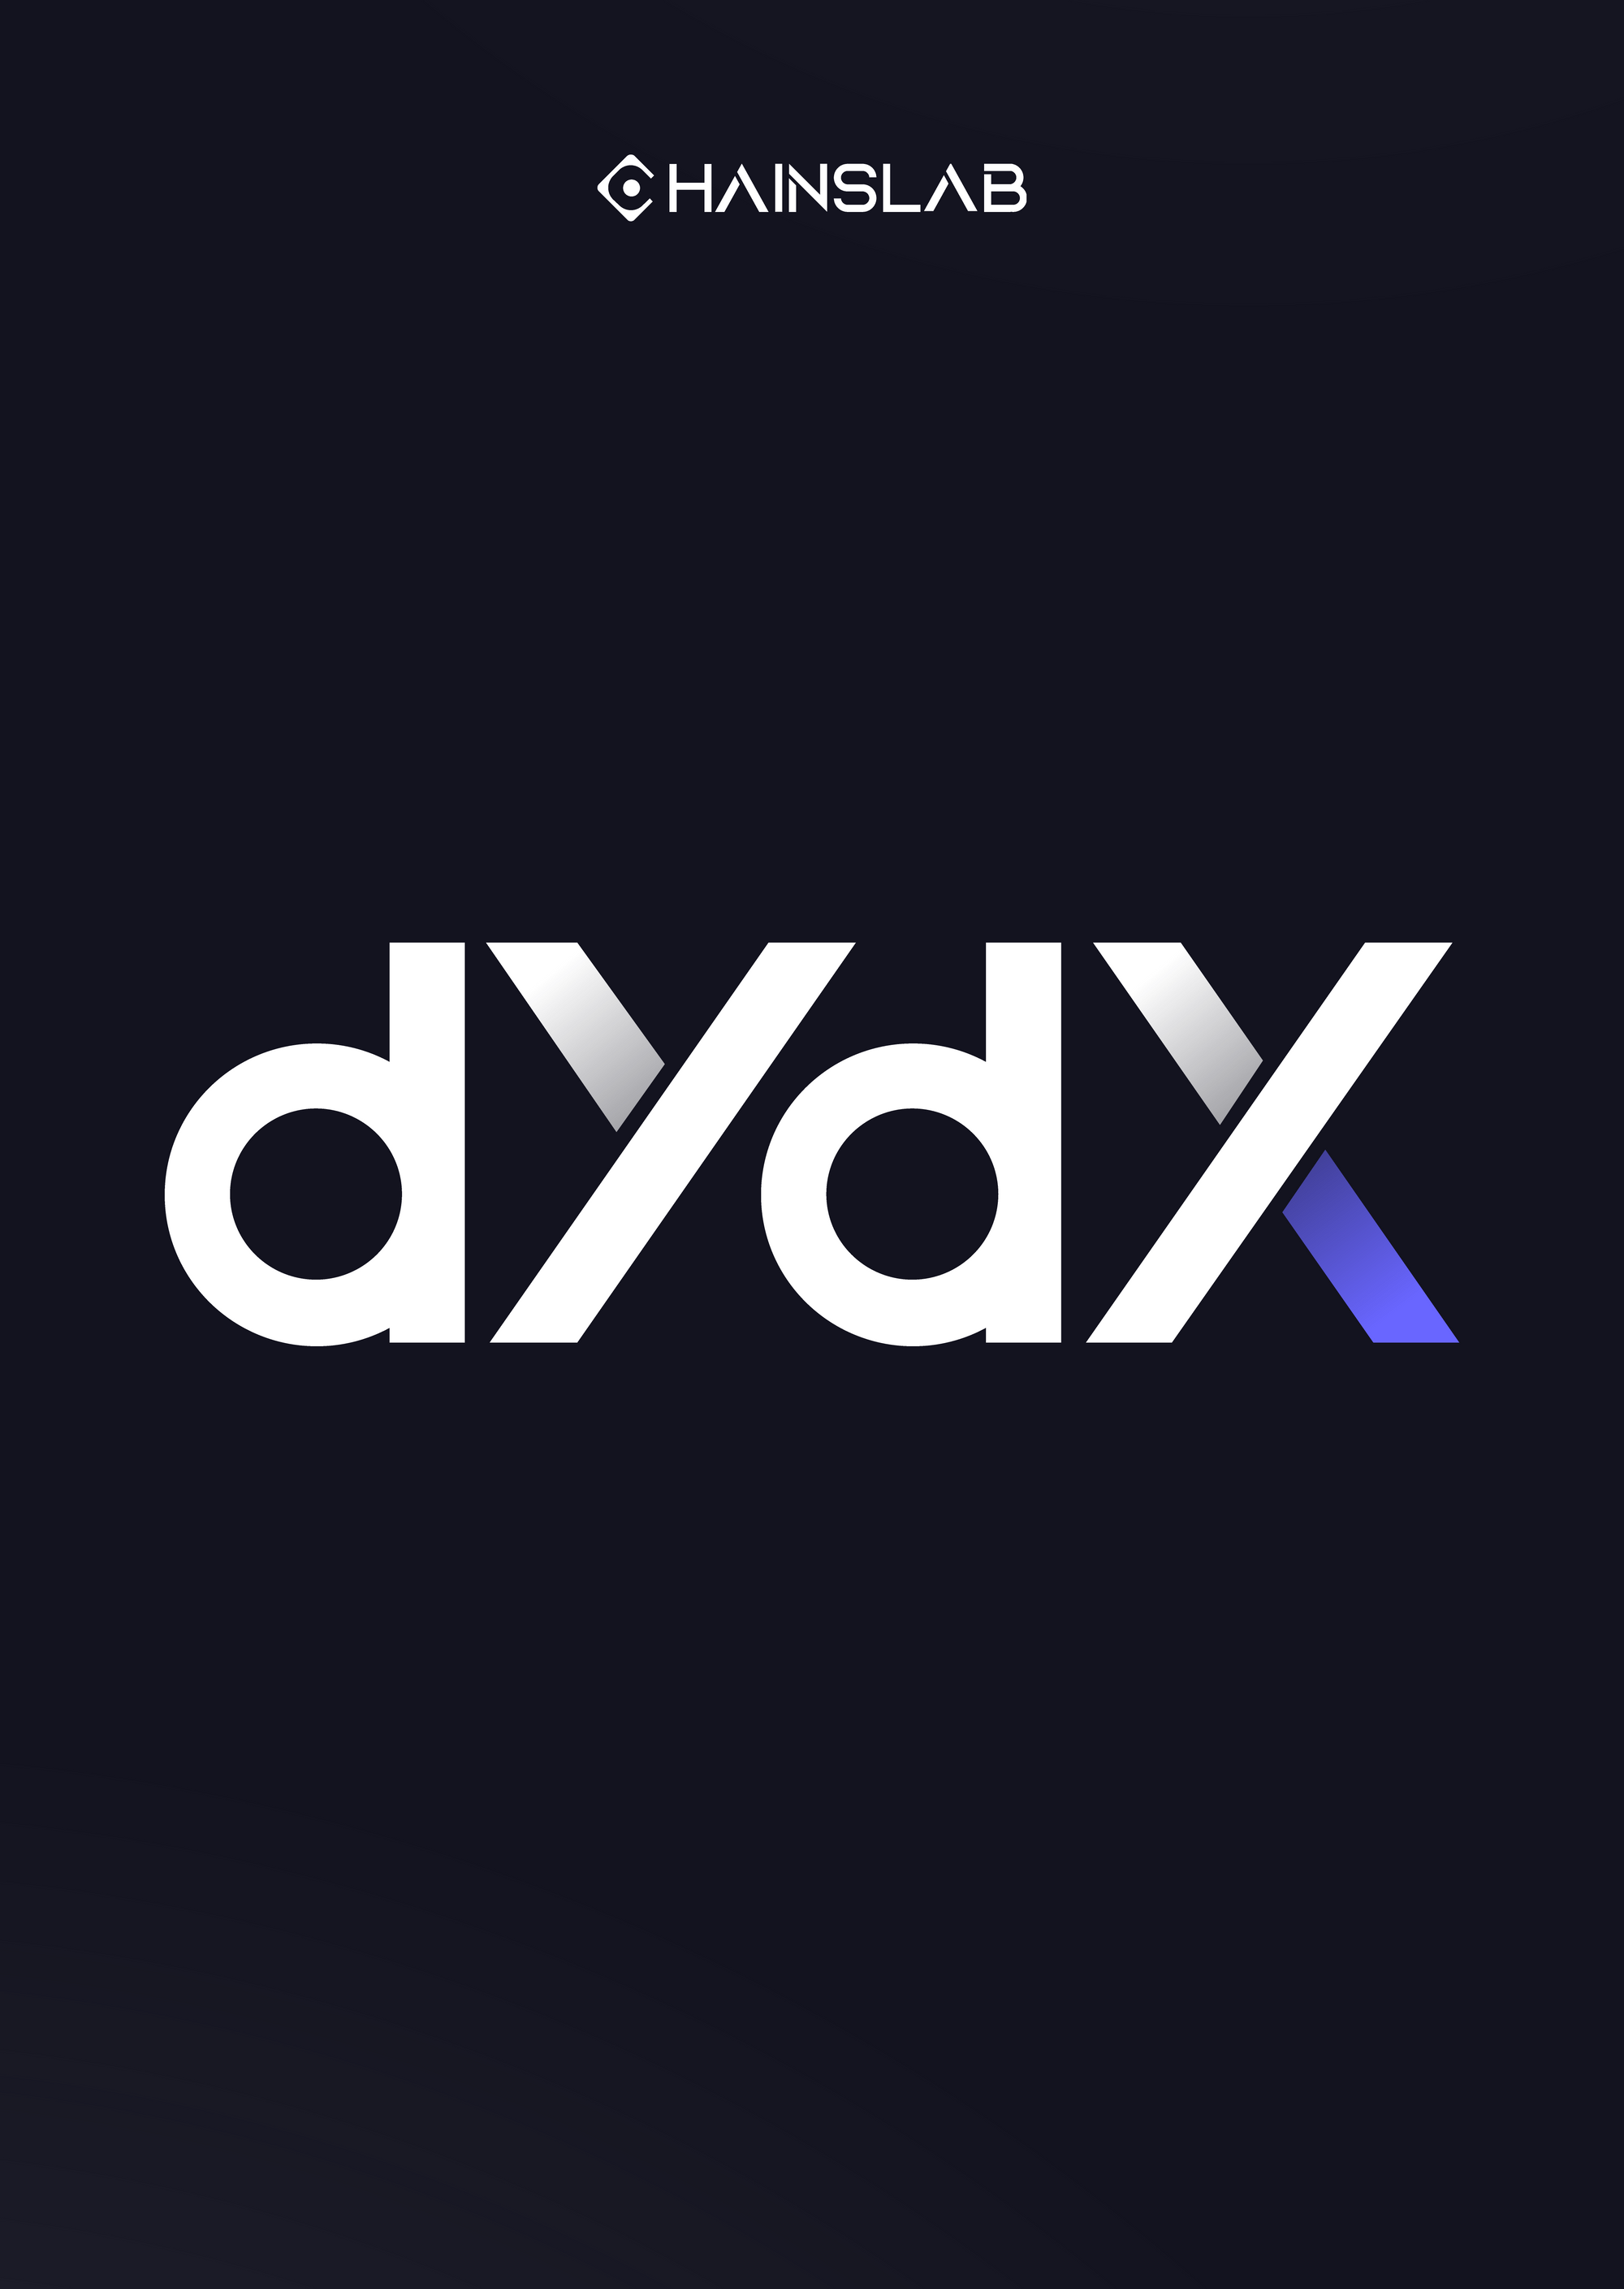 What is dYdX? The #1 CEX Replacement